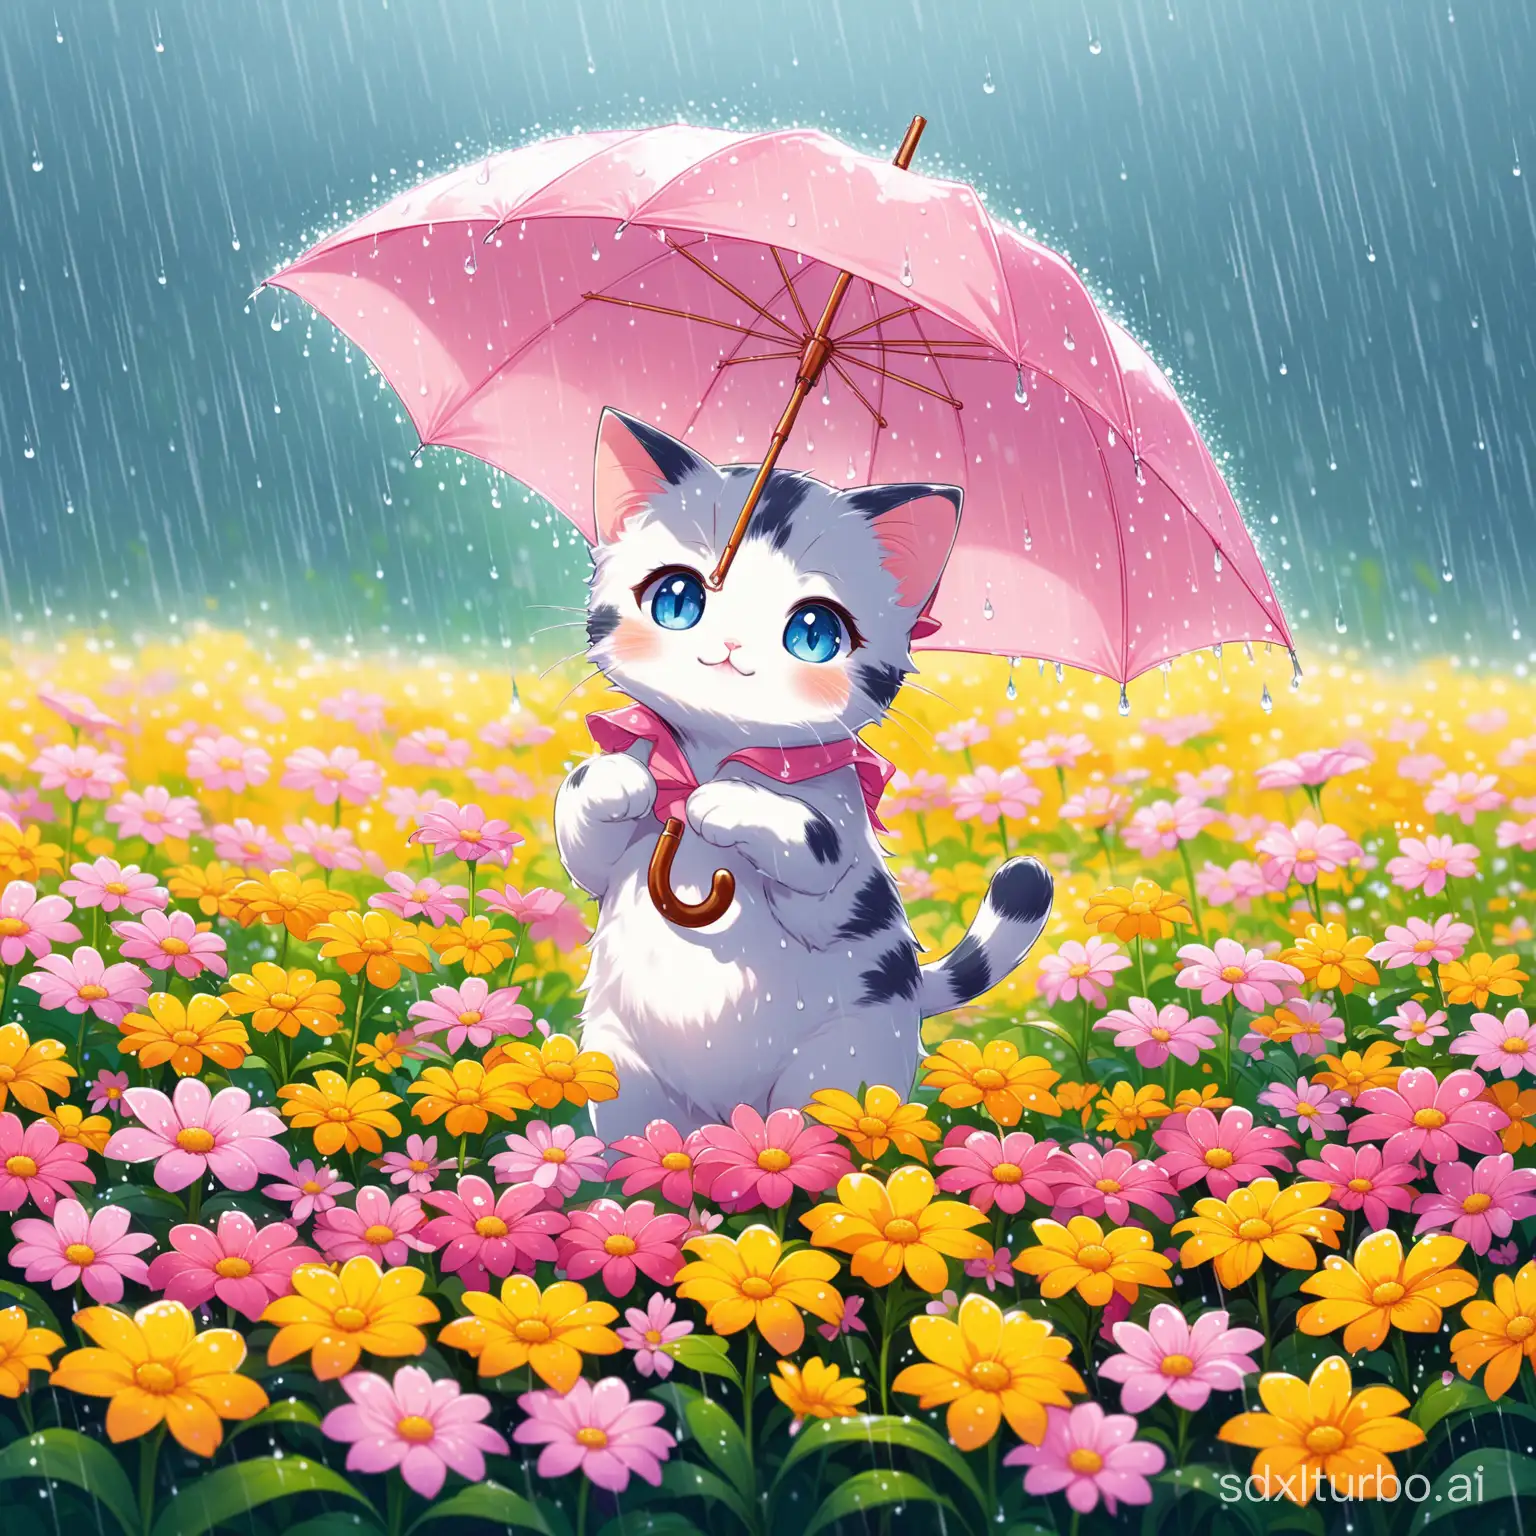 Adorable-Cat-with-Umbrella-Surrounded-by-Blossoms-in-Rain